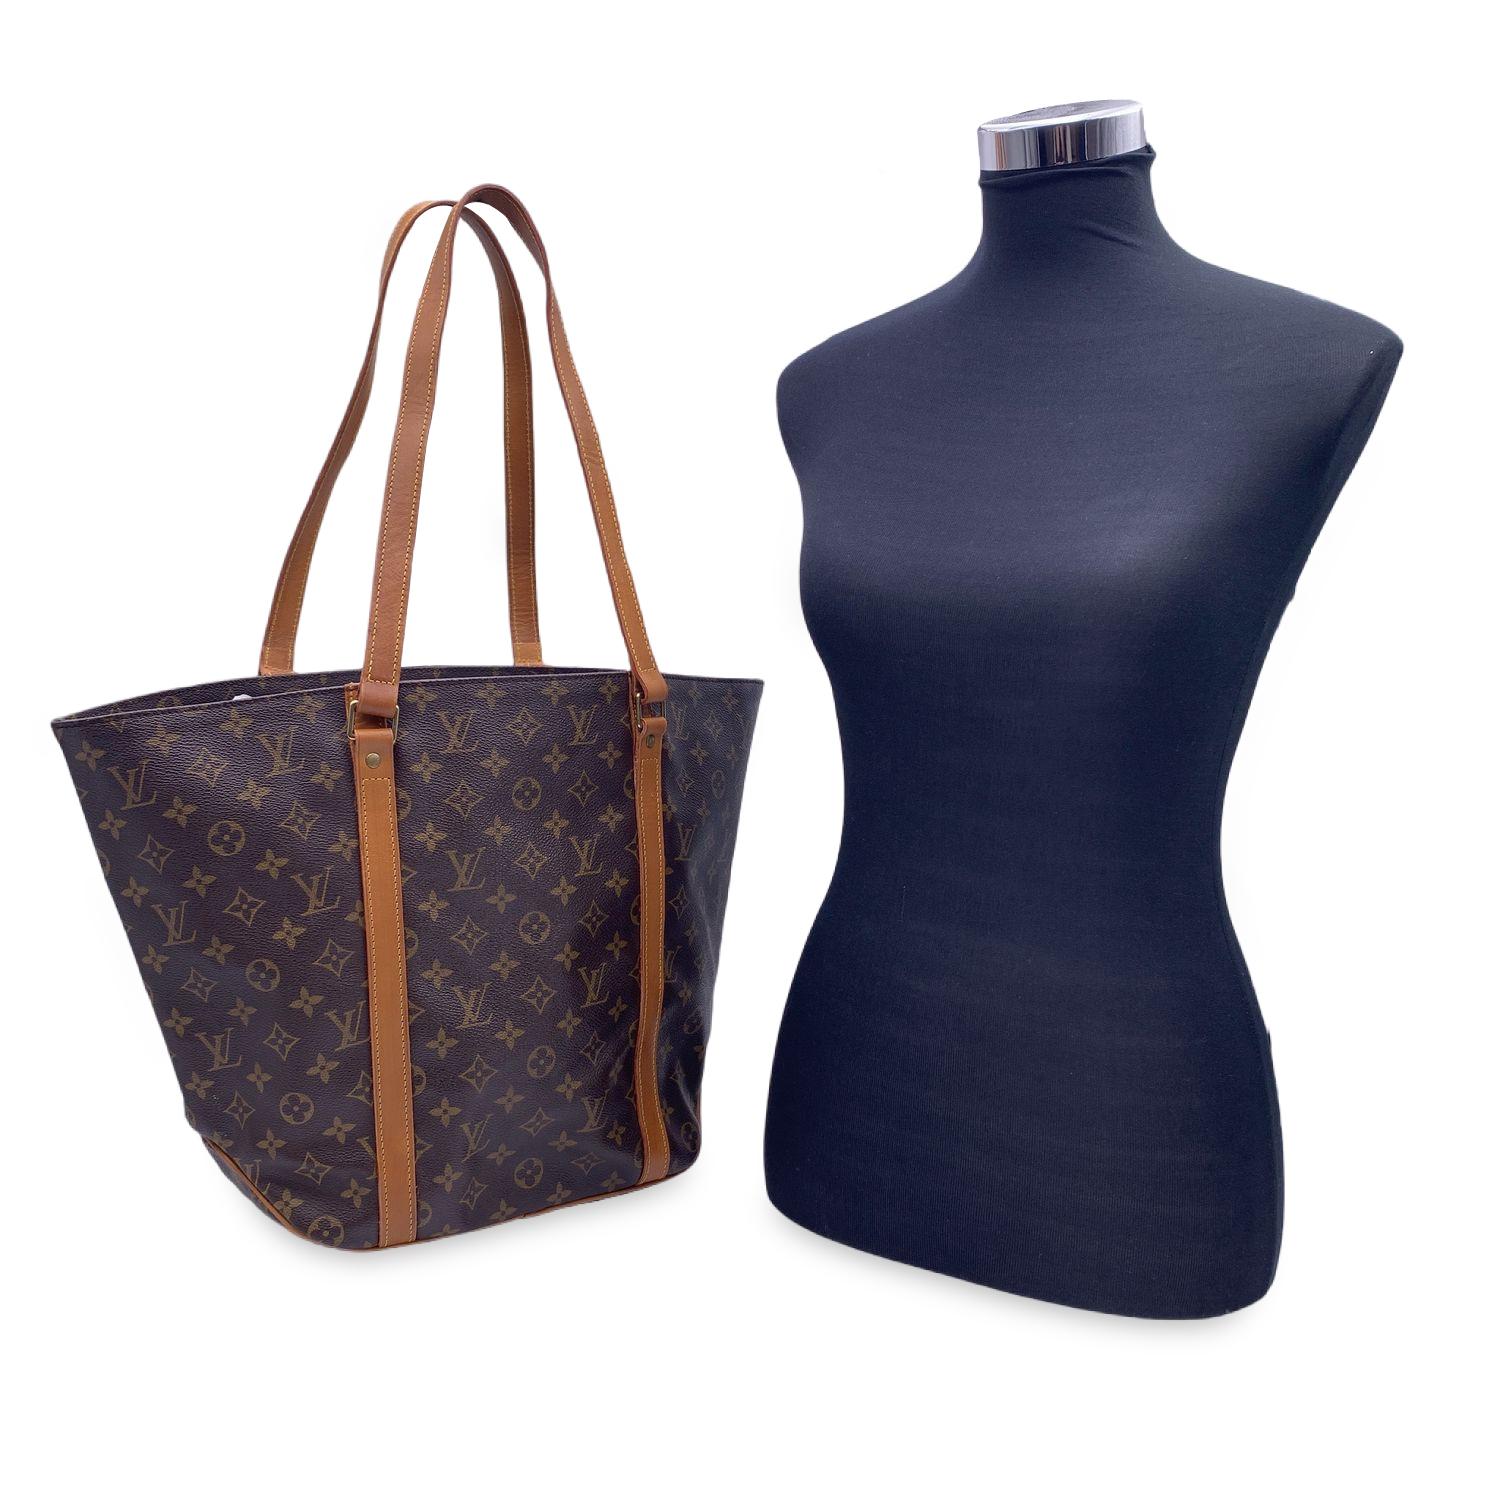 Louis Vuitton Sac Shopping ToteBag. Monogram canvas with leather trim and handles. Open top. Fabric lining with 1 side zip pocket and D-ring inside. Golden color metallic pieces. Beige canvas lining. 'LOUIS VUITTON Paris - Made in France' engraved